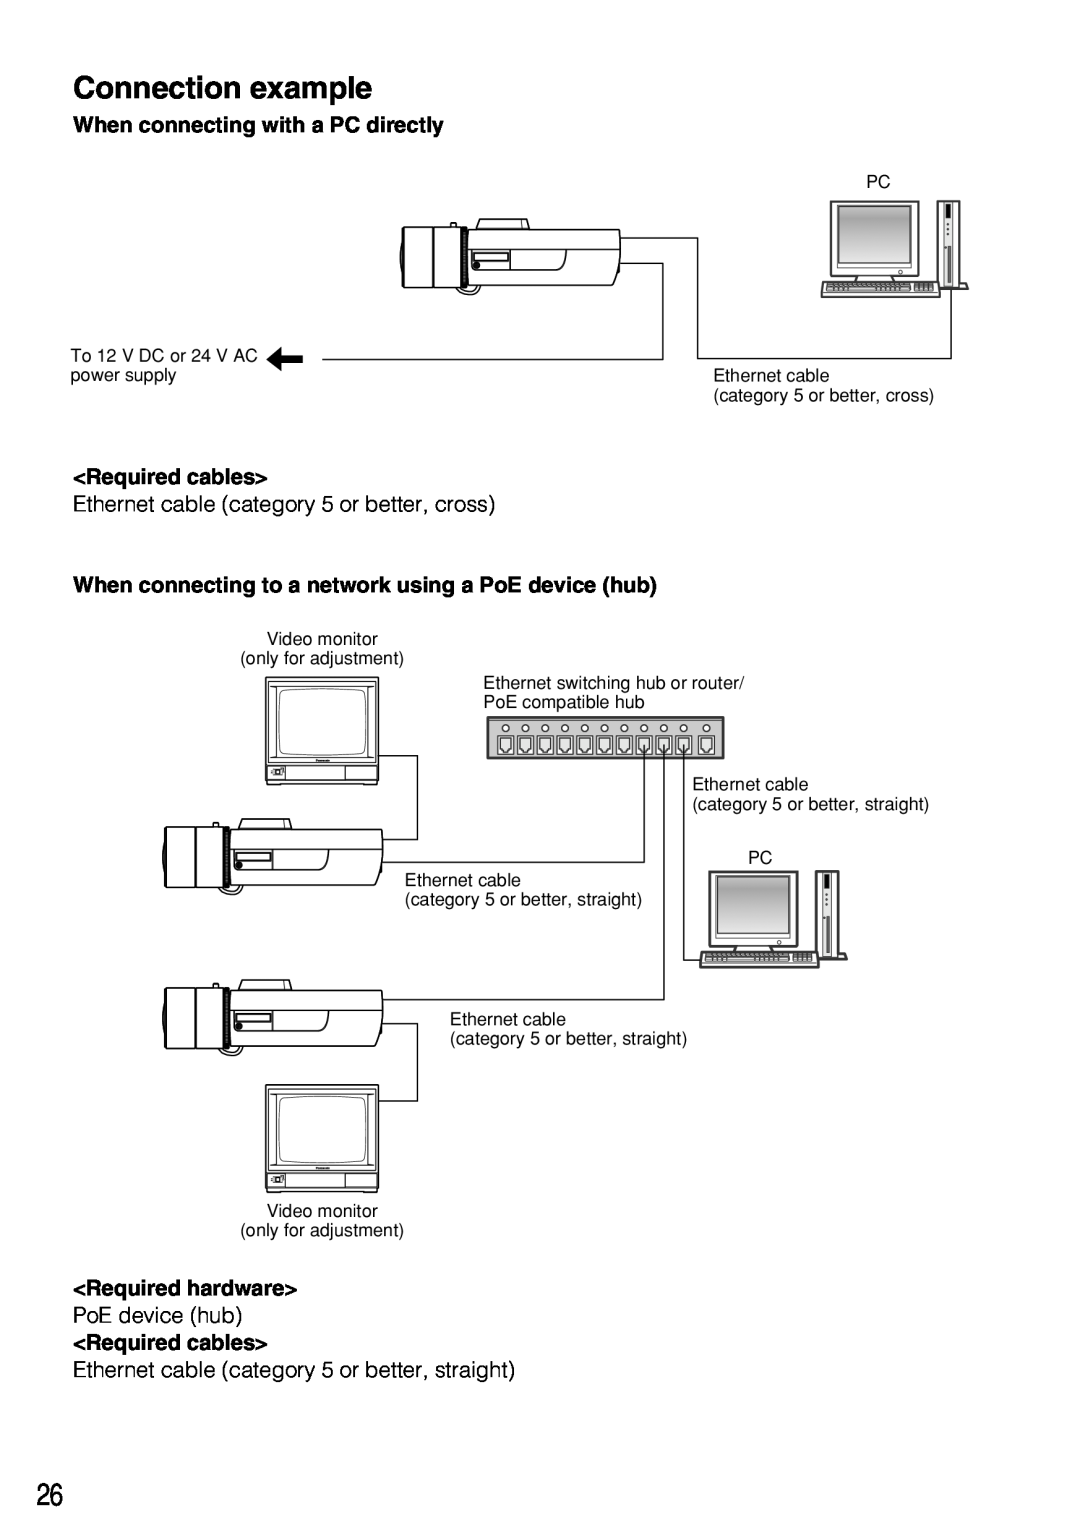 Panasonic WV-NP304 manual Connection example, When connecting with a PC directly, Required cables, Required hardware 